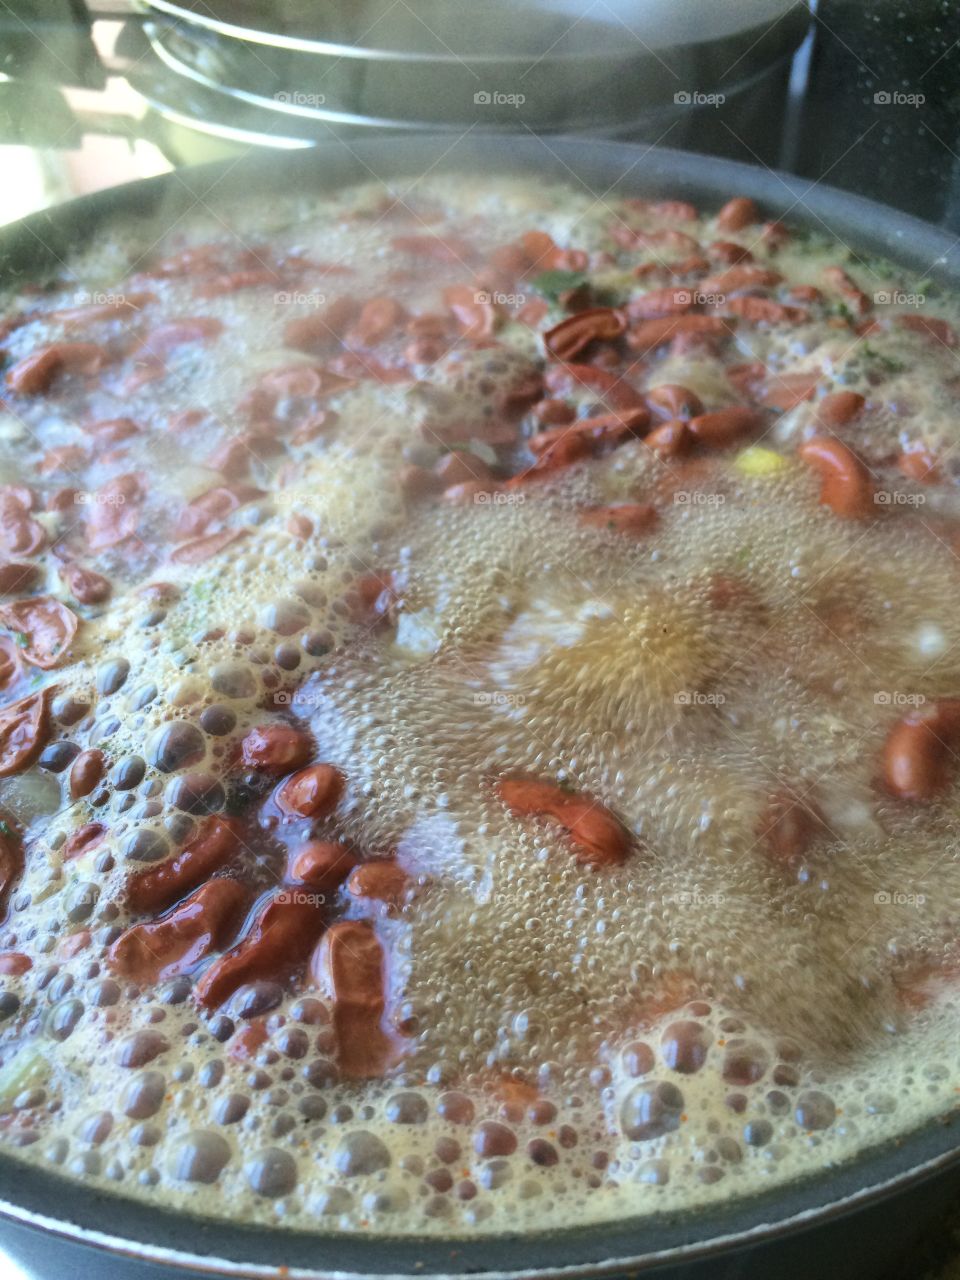 Cooking down some Louisiana red beans. 